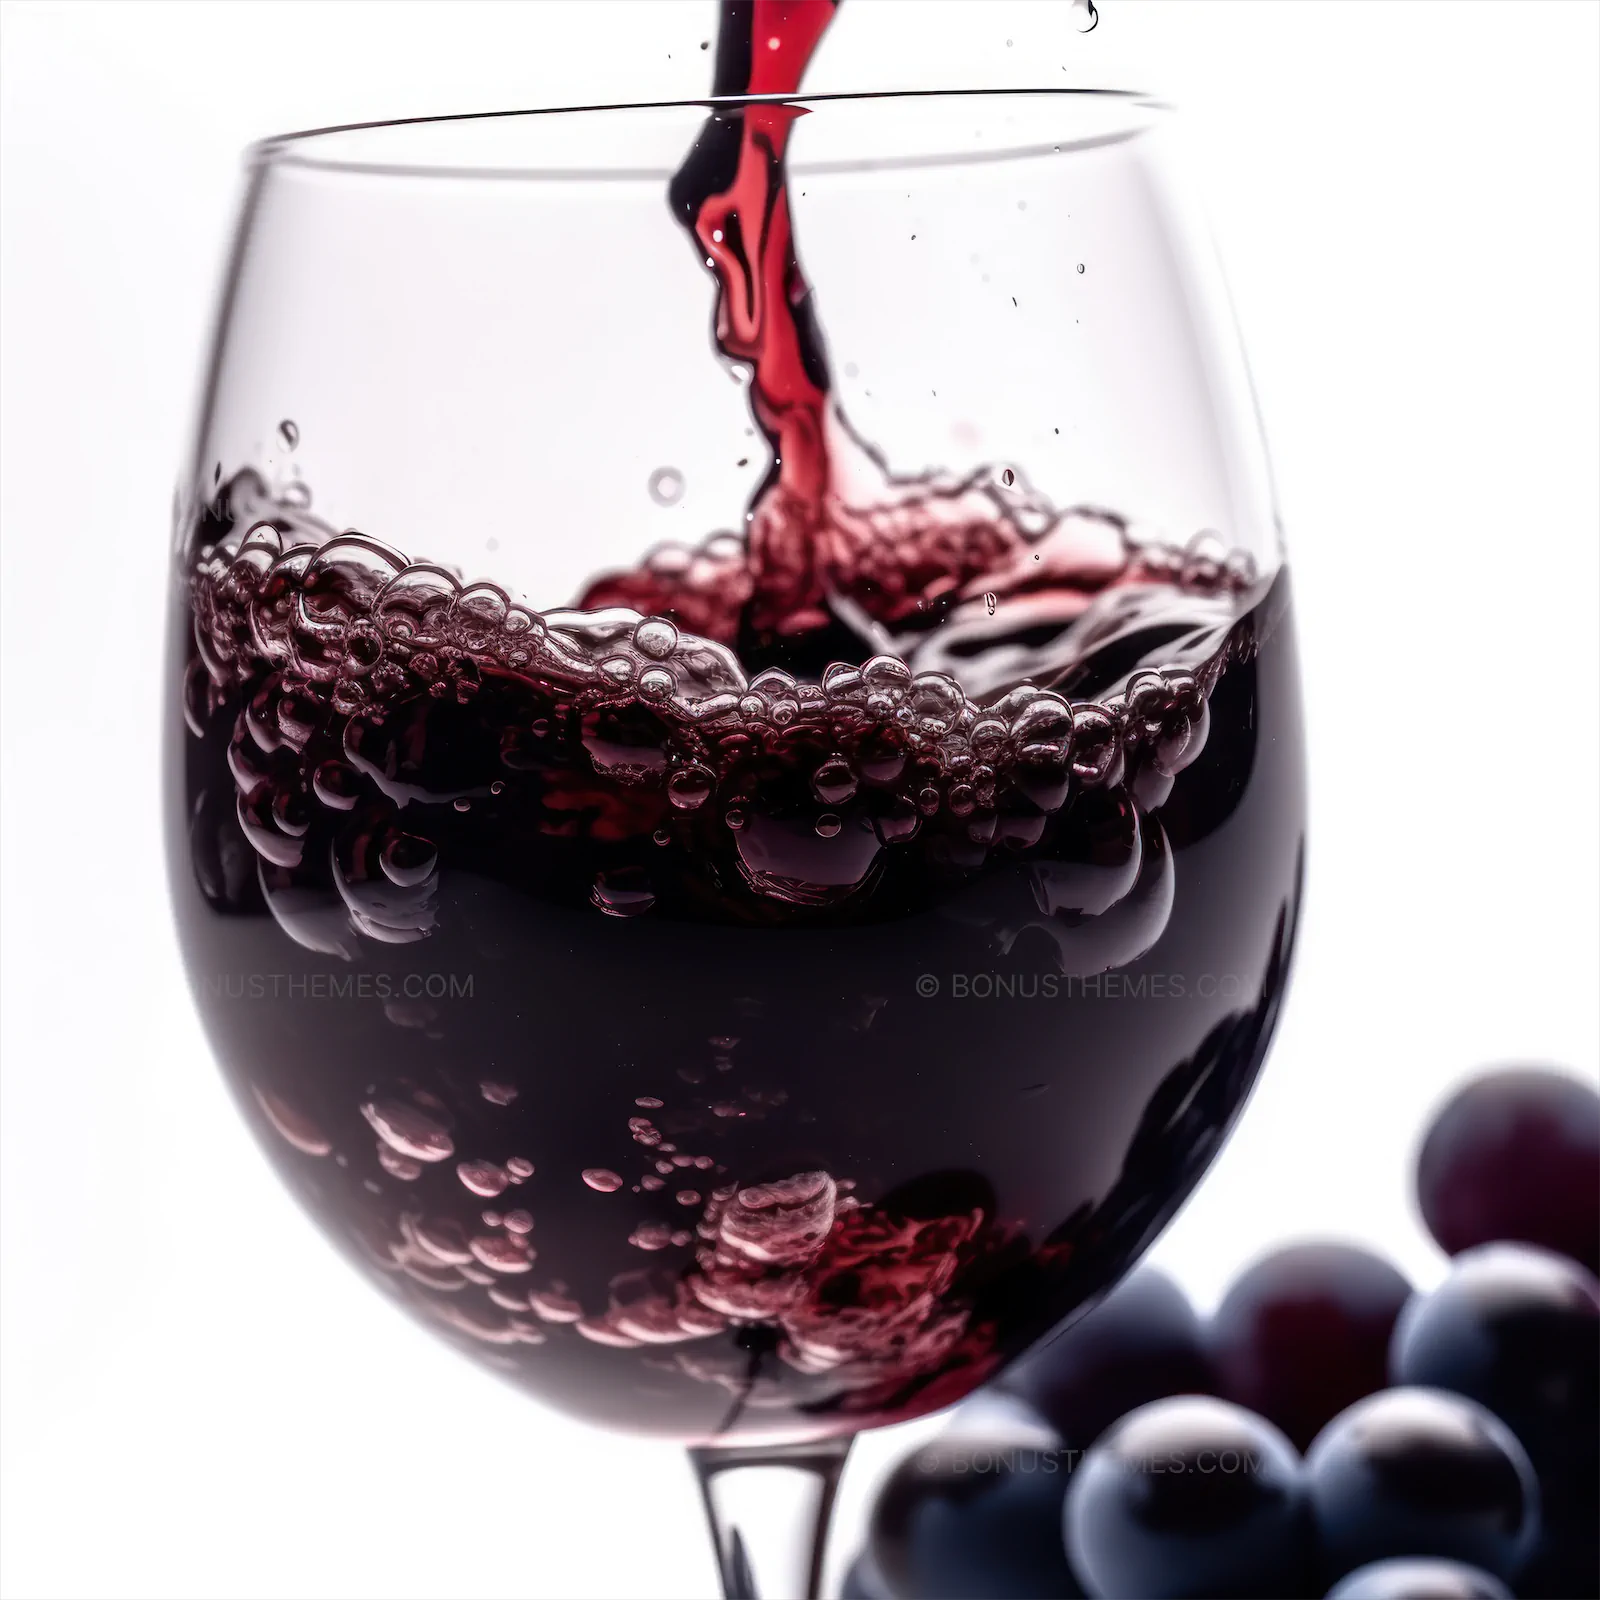 A red wine being poured into a glass with grapes,